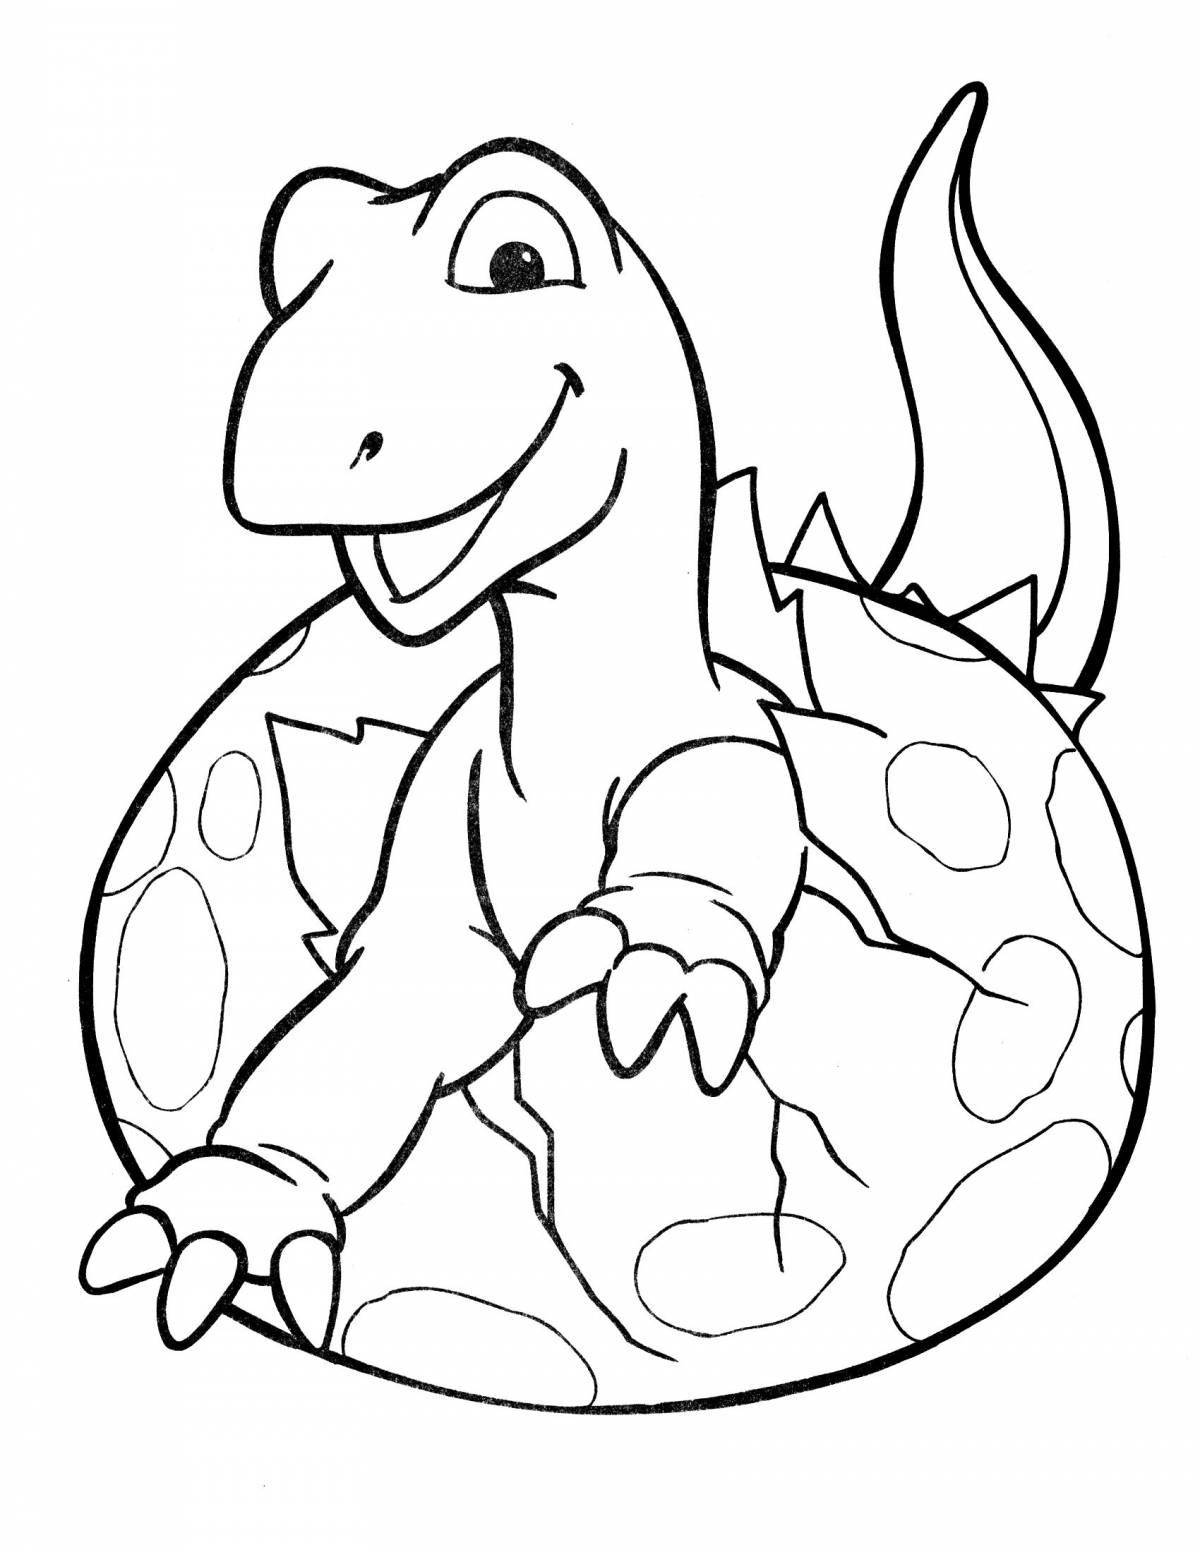 Creative dinosaur coloring book for kids